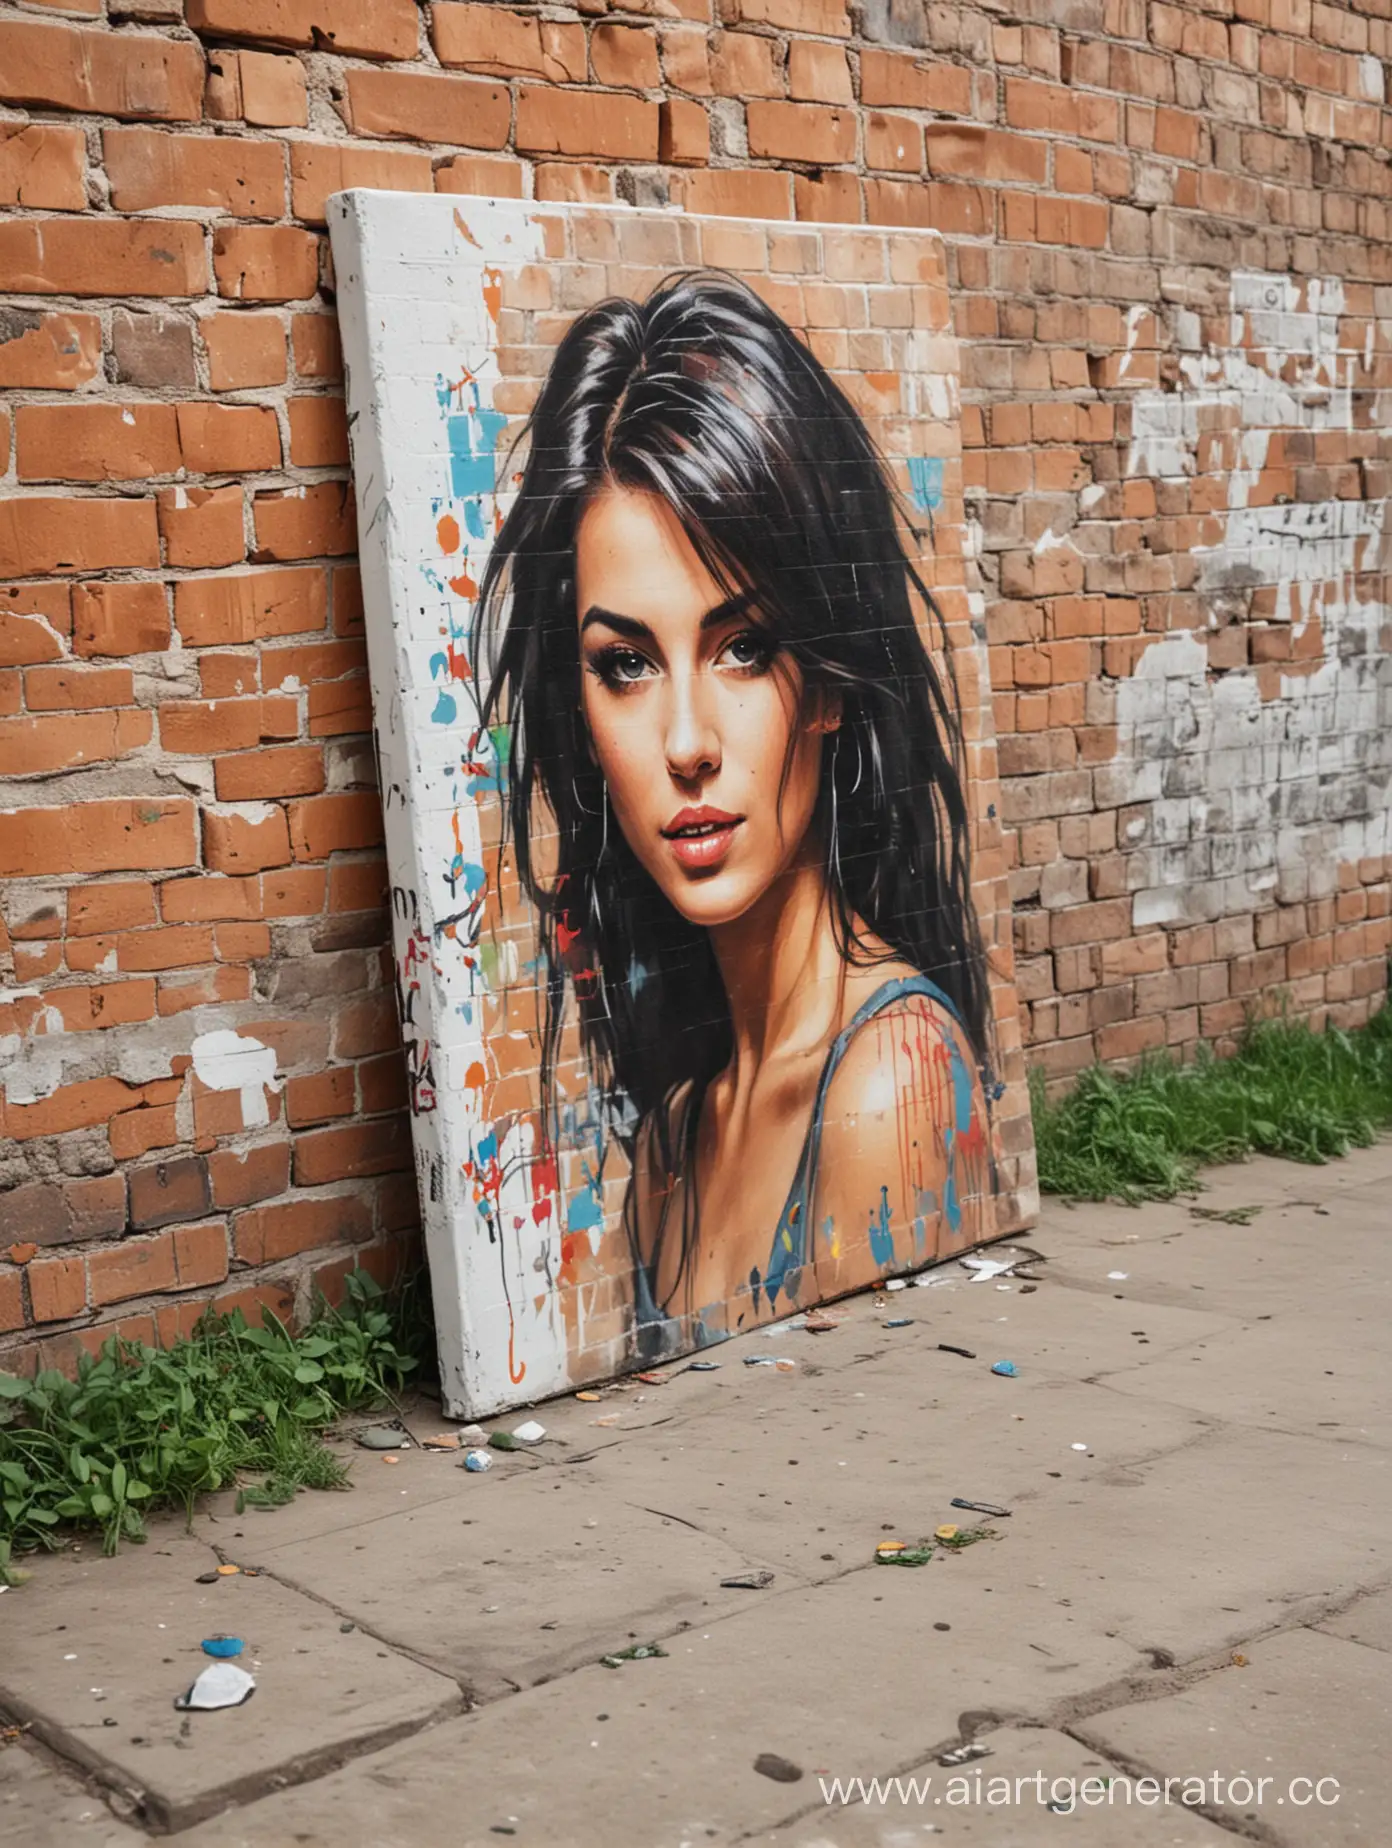 The portrait on canvas stands on the floor, next to a brick wall.
A wall with graffiti. In the park.